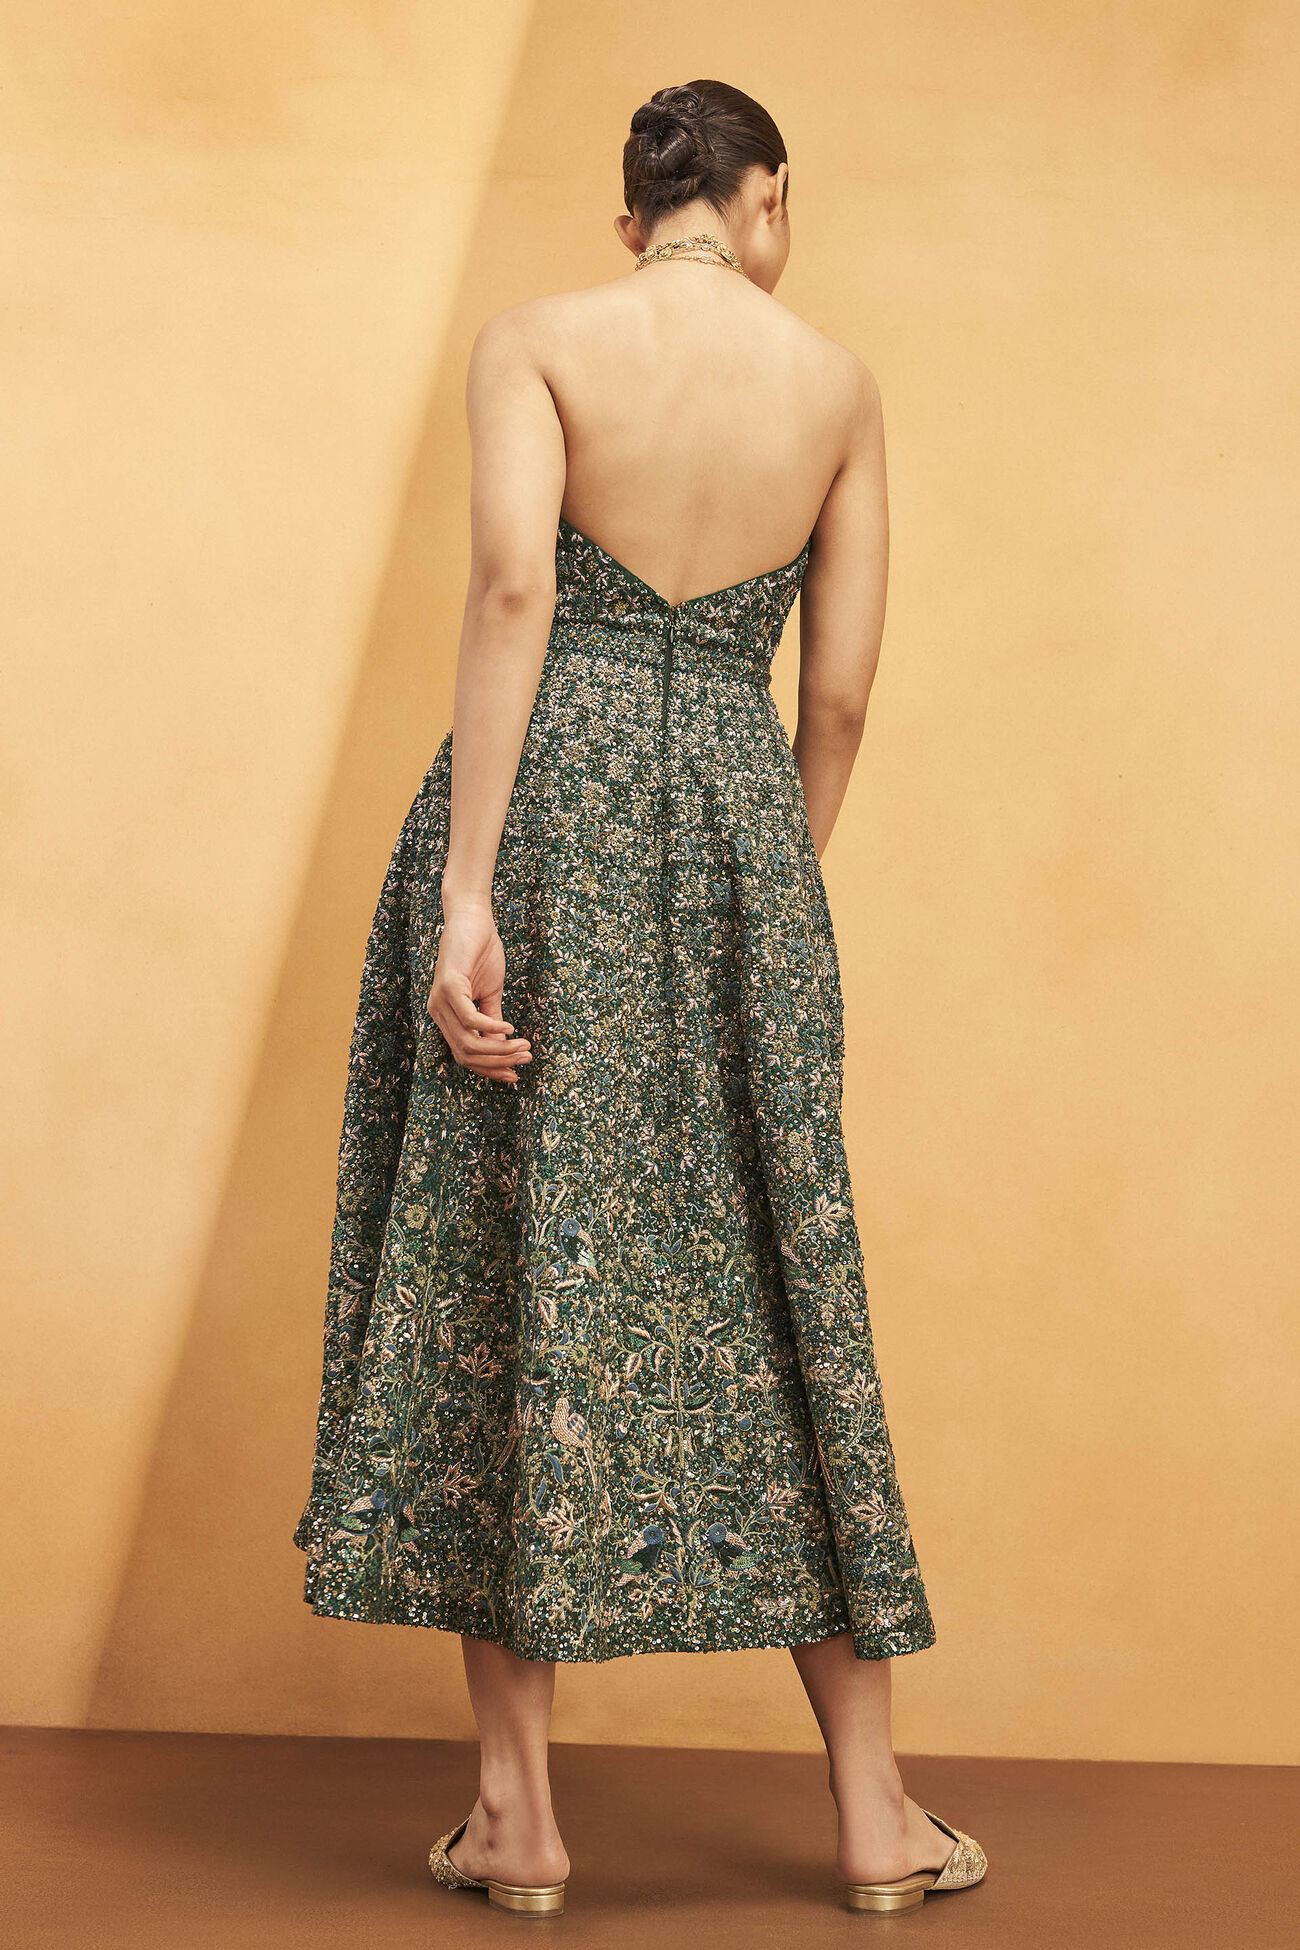 Deep Into The Forest Zardozi Embroidered Silk Dress - Green, Green, image 3